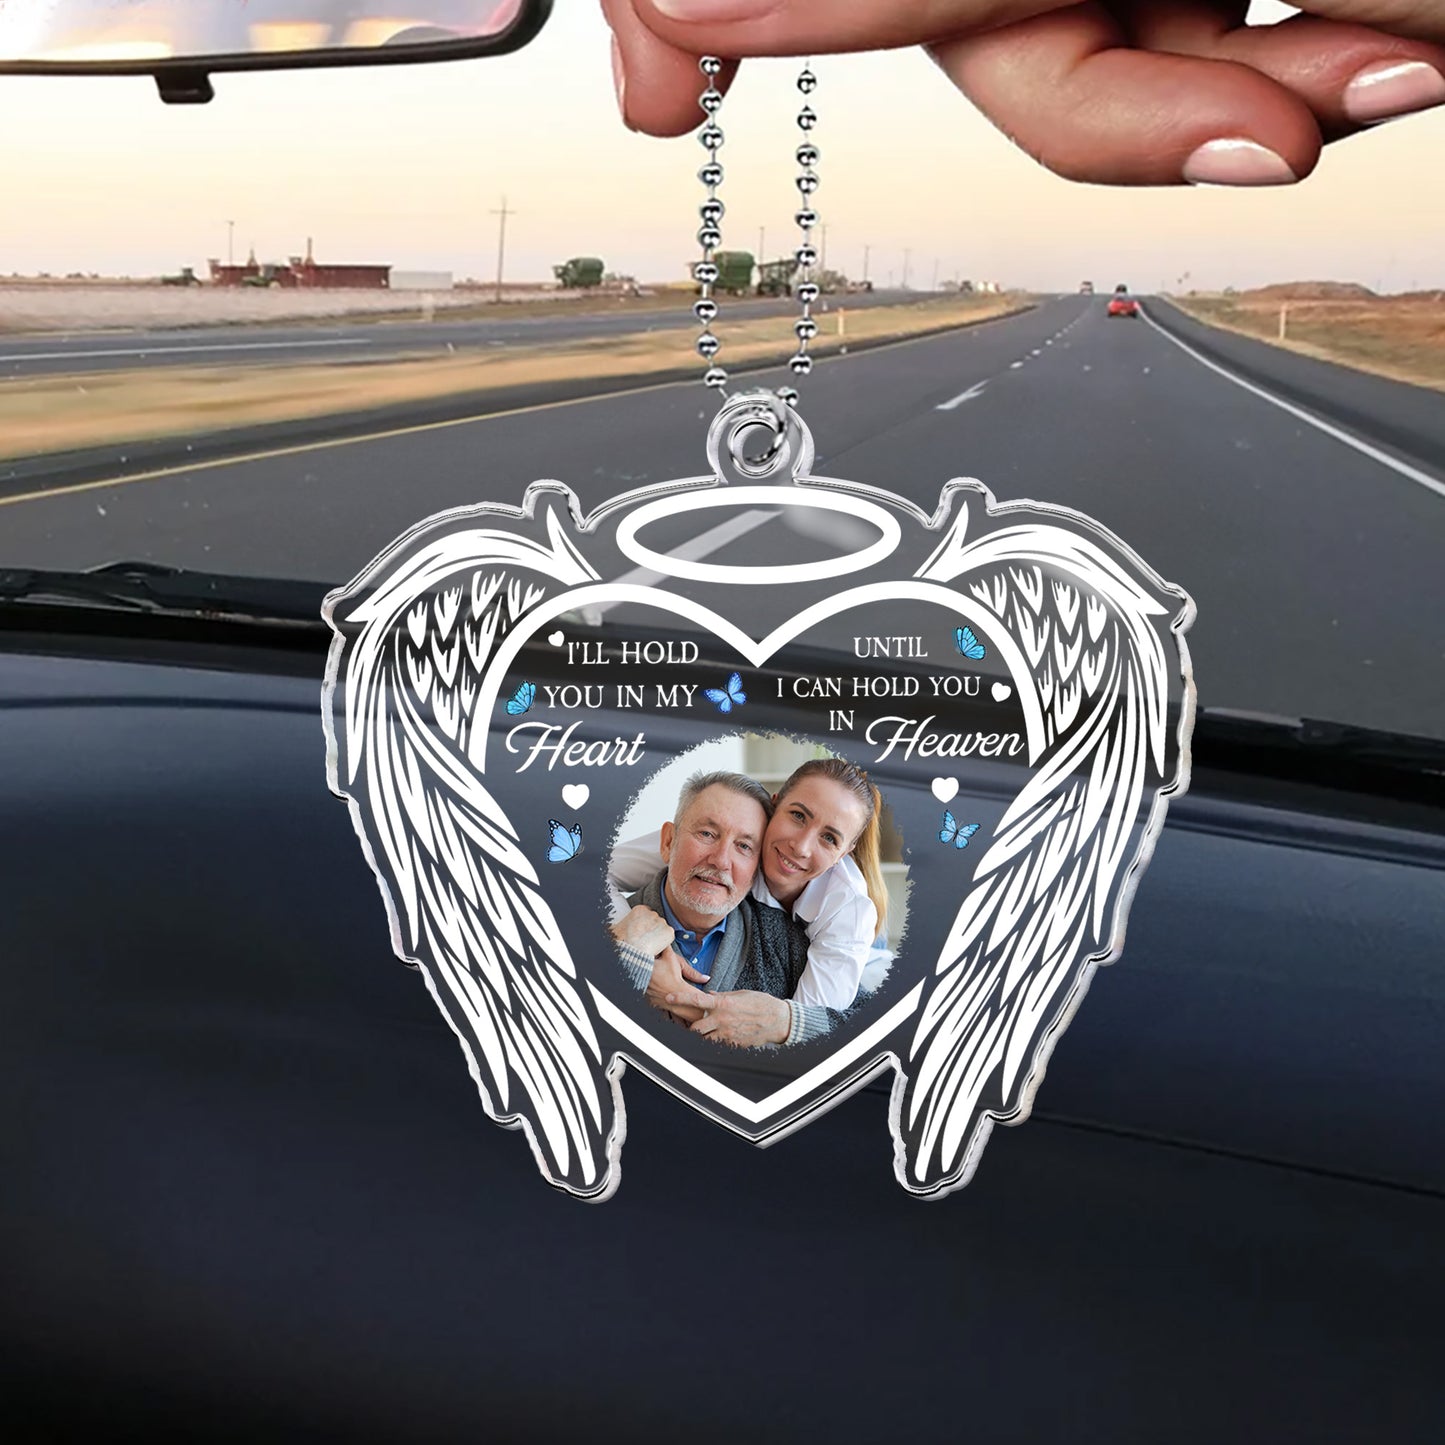 I'll Hold You In My Heart Forever - Personalized Photo Car Ornament